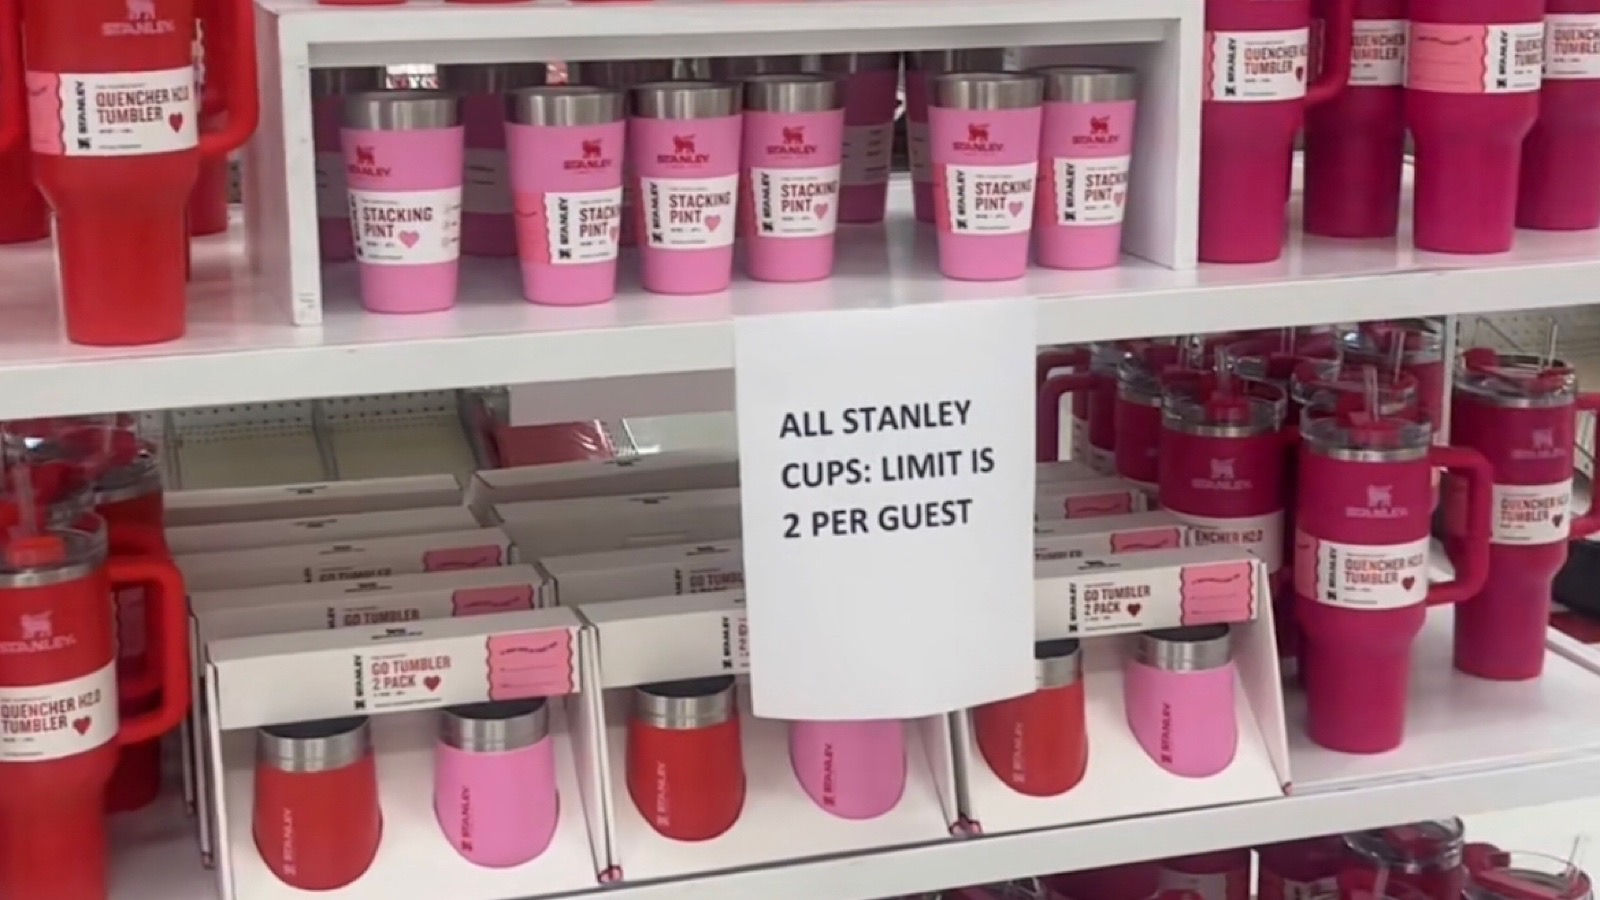 Target and Stanley are determined to take ALL our money this